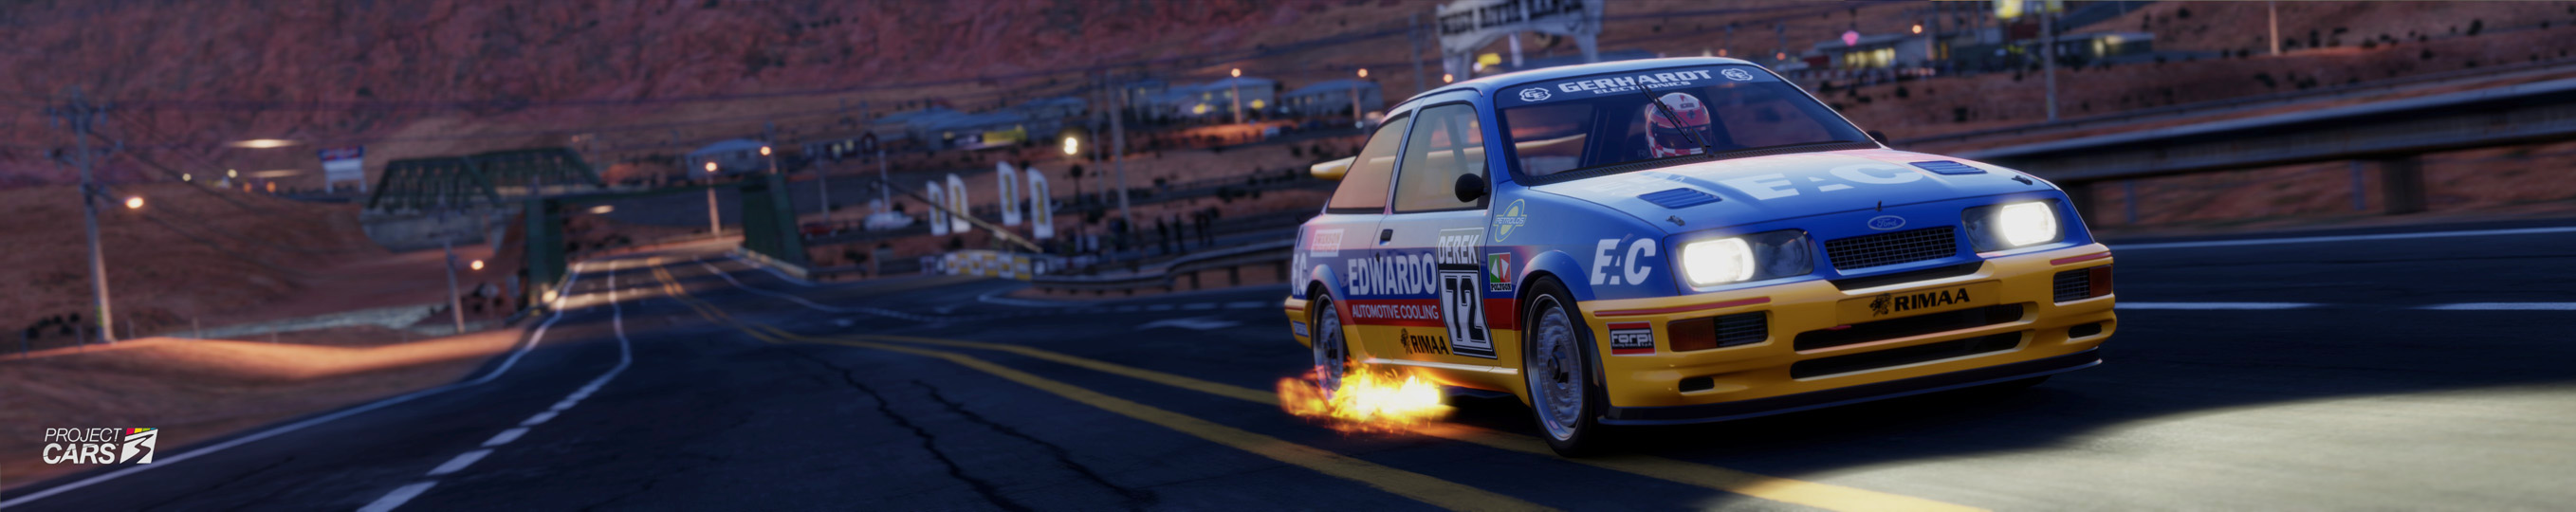 1 PROJECT CARS 3 COSWORTH at MONUMENT CANYON crop copy.jpg